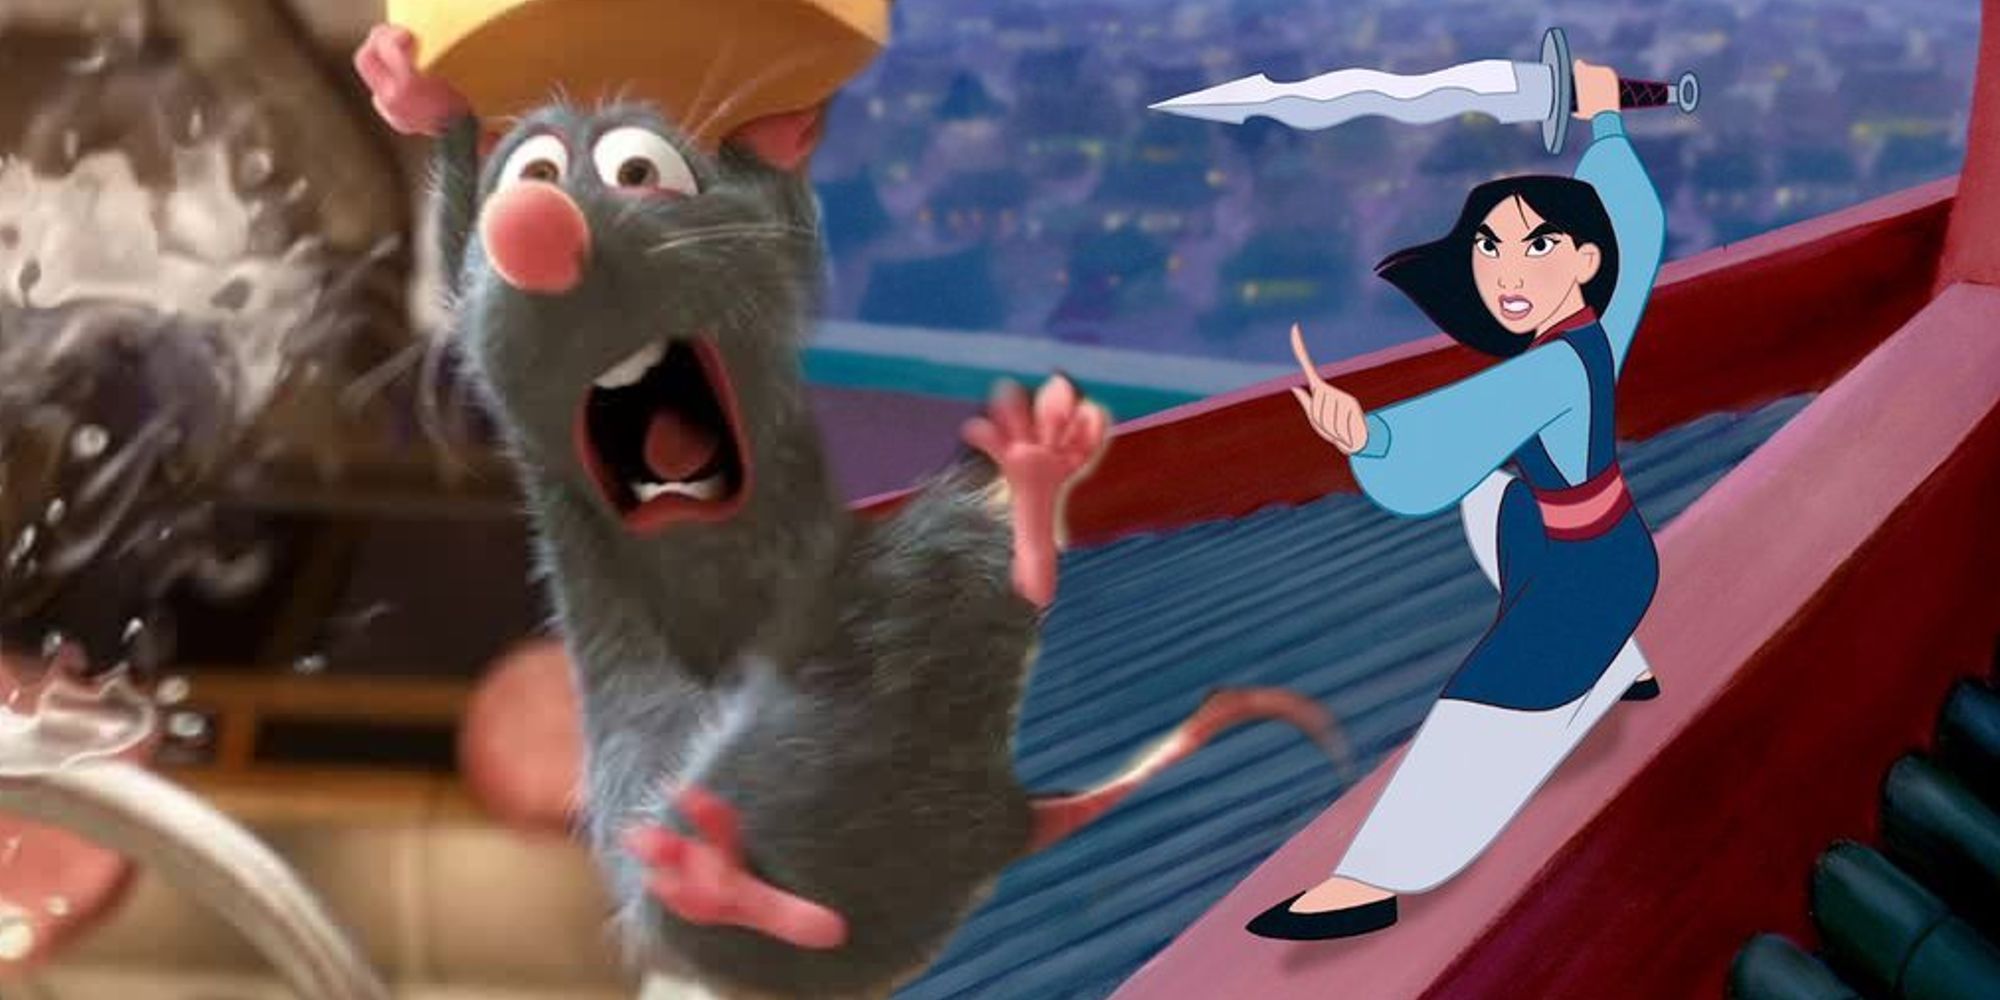 Remy and Mulan juxtaposed in a custom image